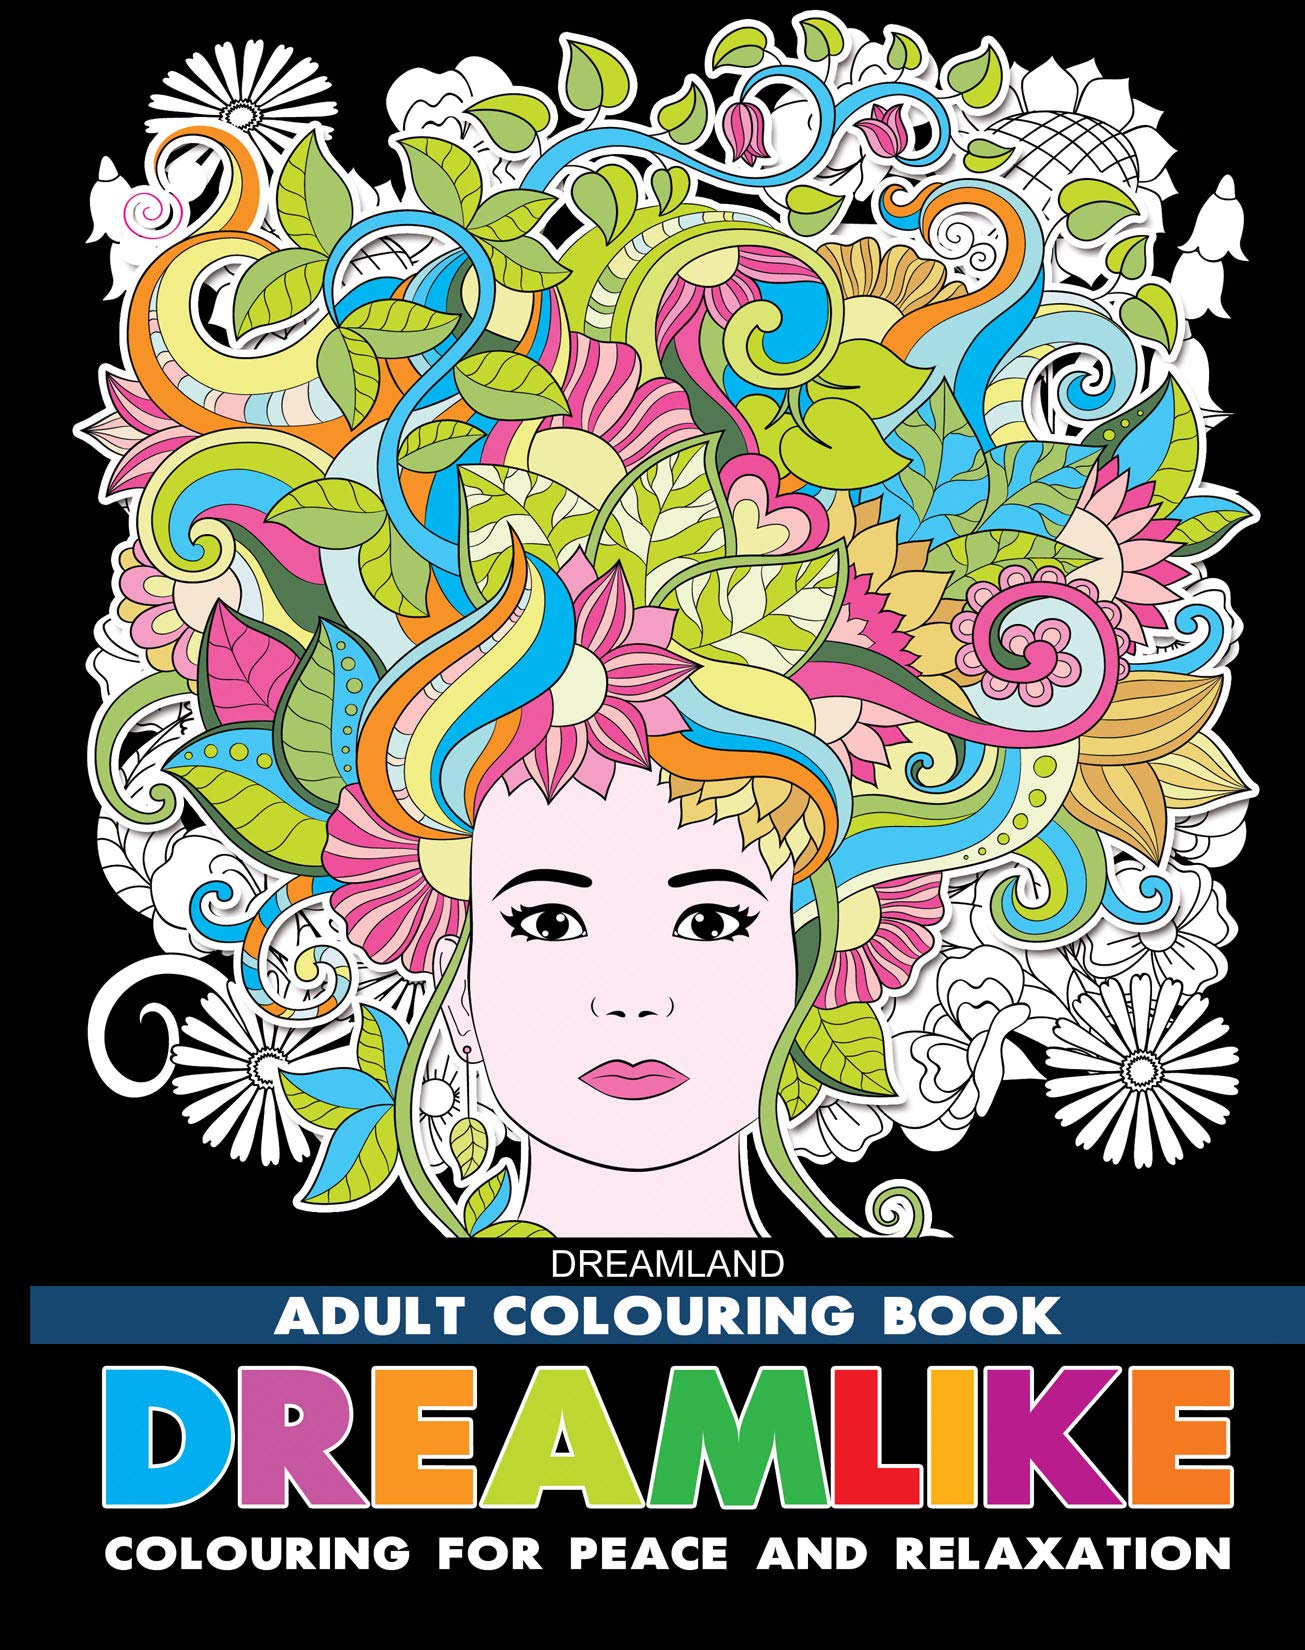 Dreamlike - Adult Colouring Book for Peace & Relaxation (Paperback)